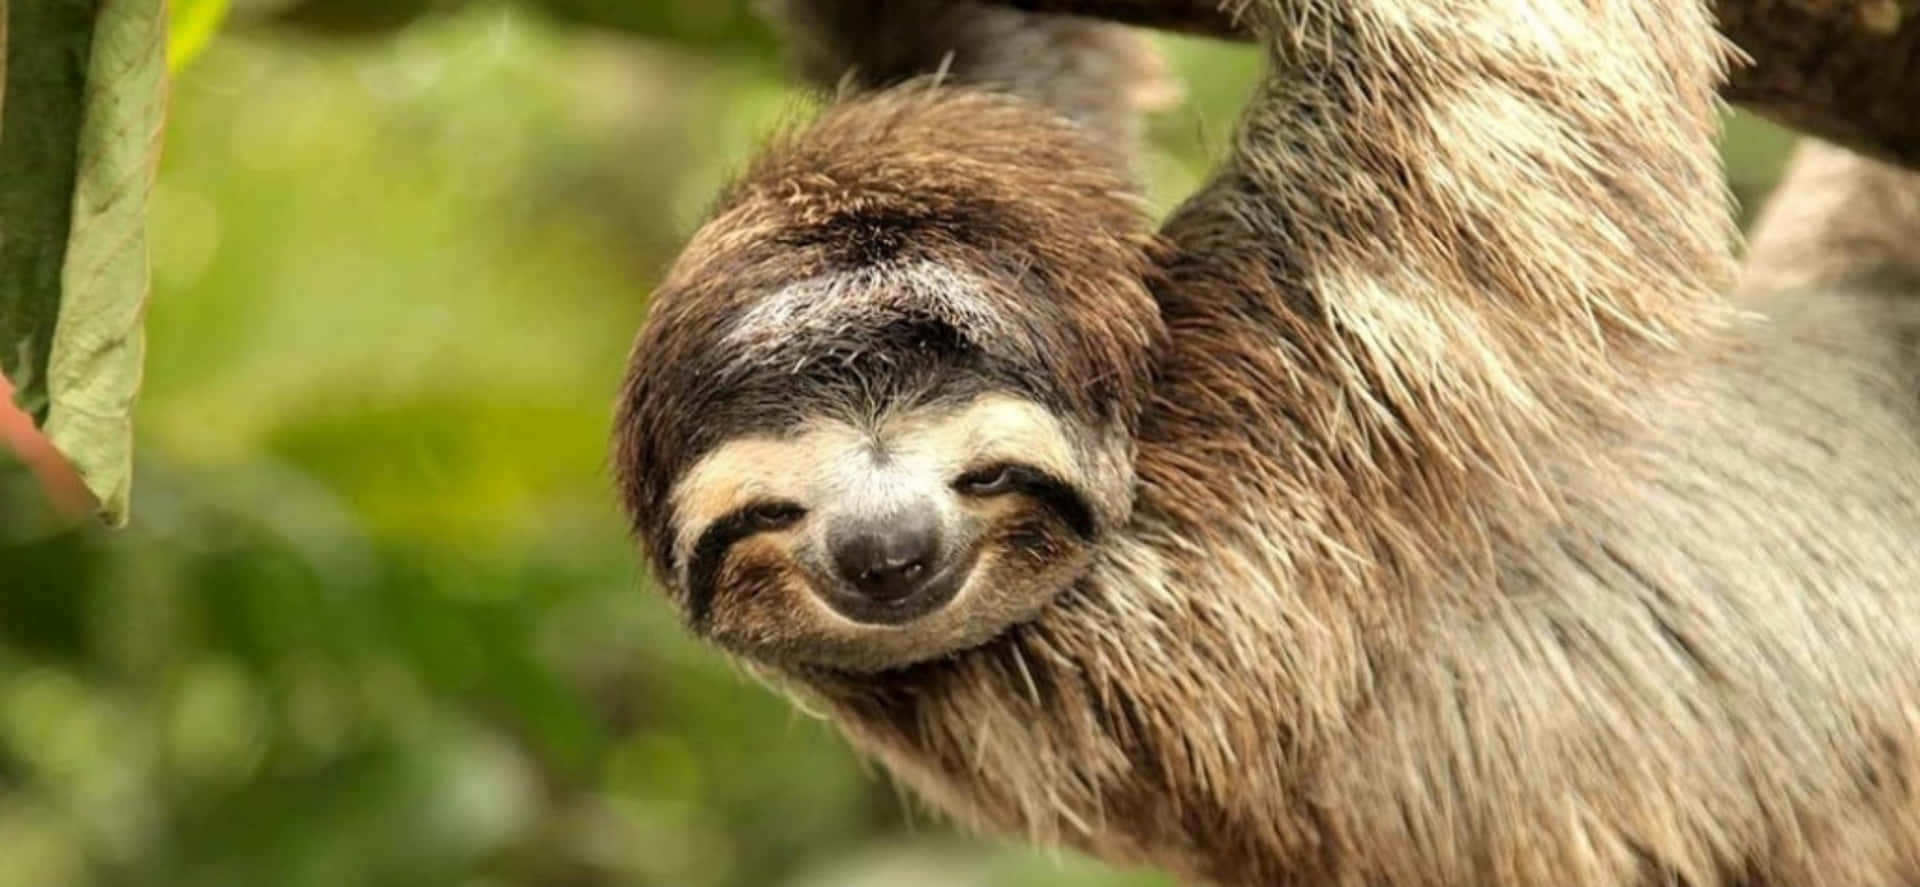 Cute Sloth Hanging Smile Picture